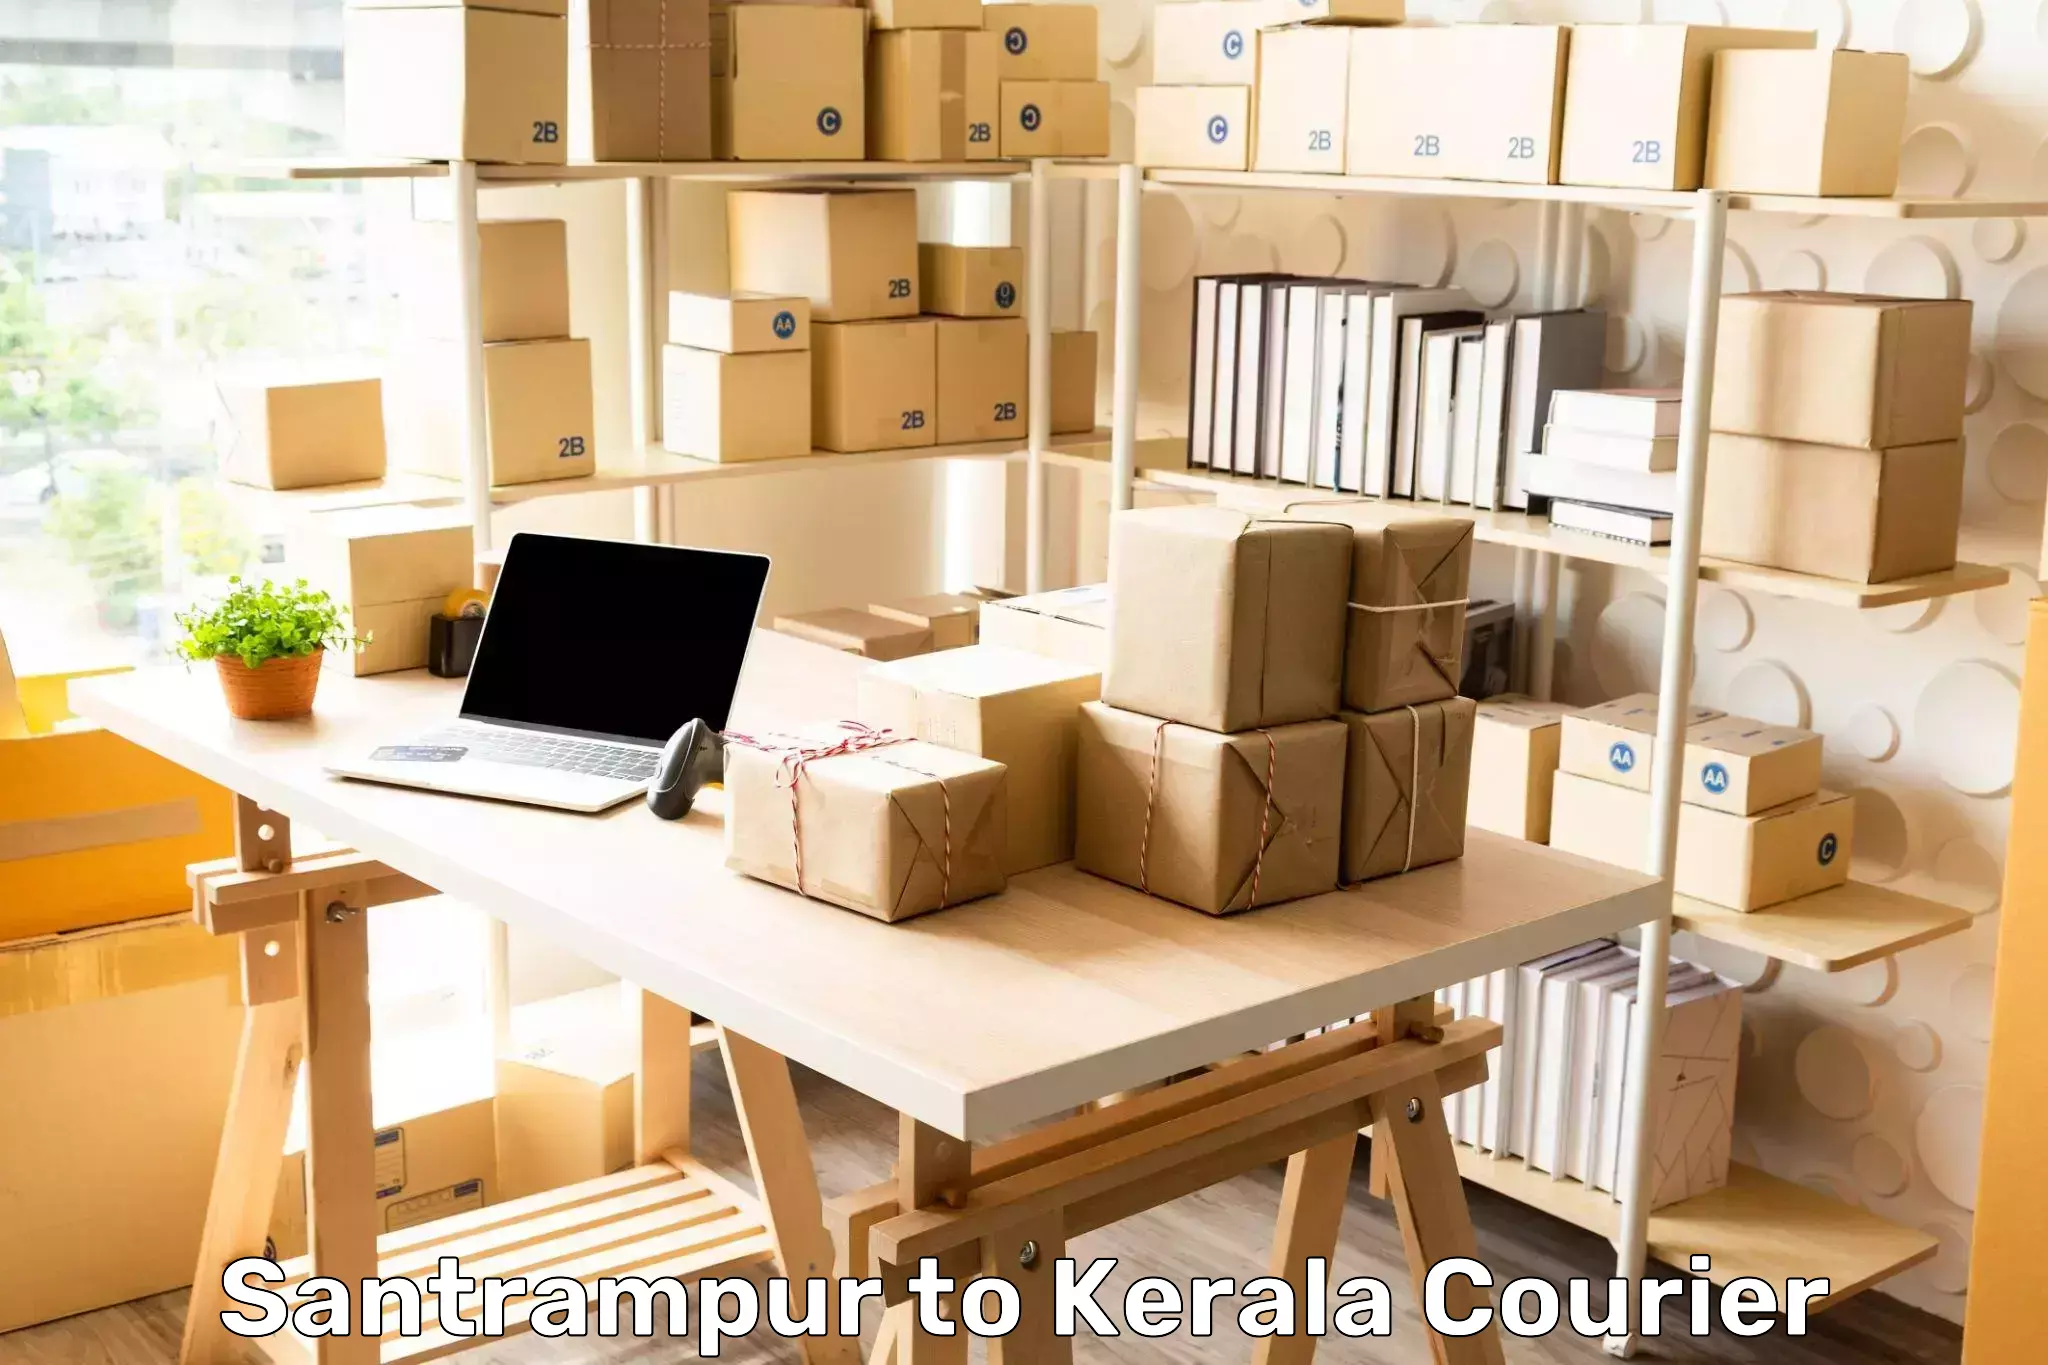 24-hour courier services in Santrampur to Tirur